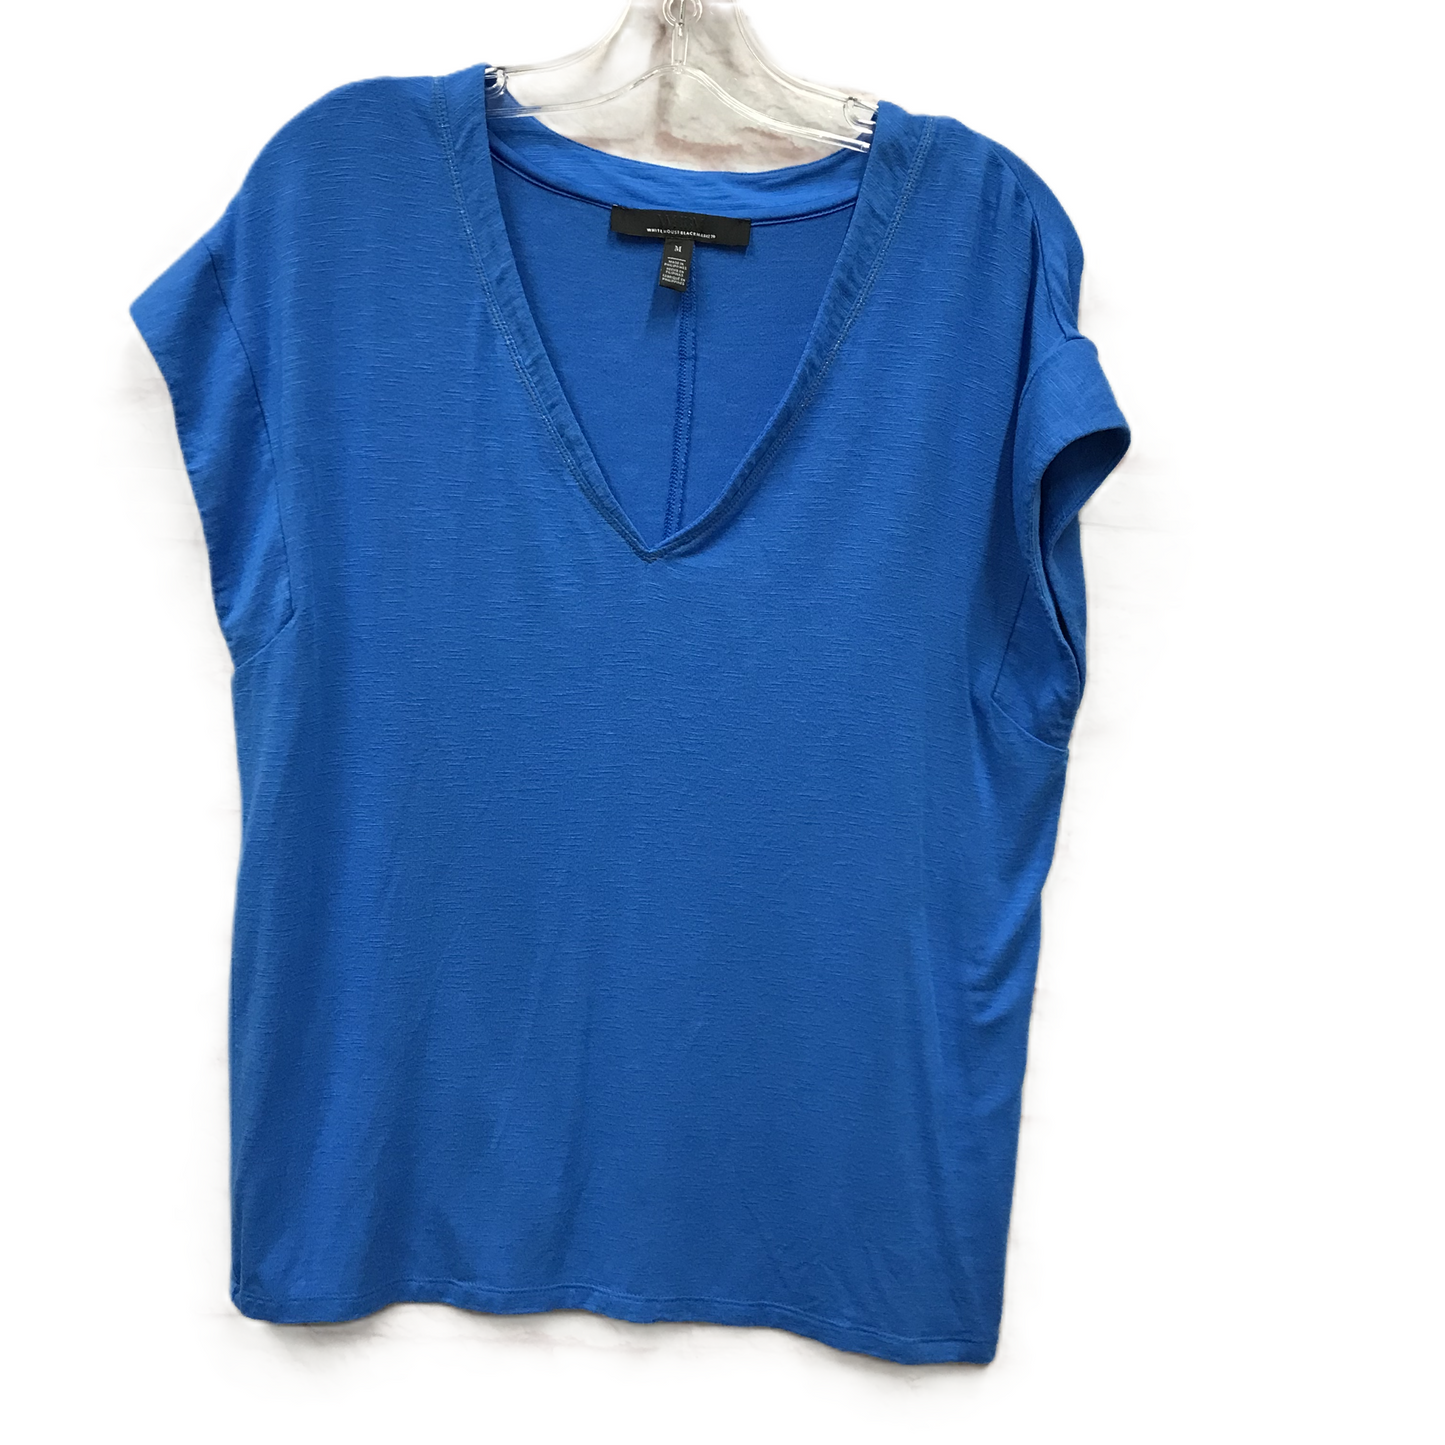 Blue Top Short Sleeve By White House Black Market, Size: M